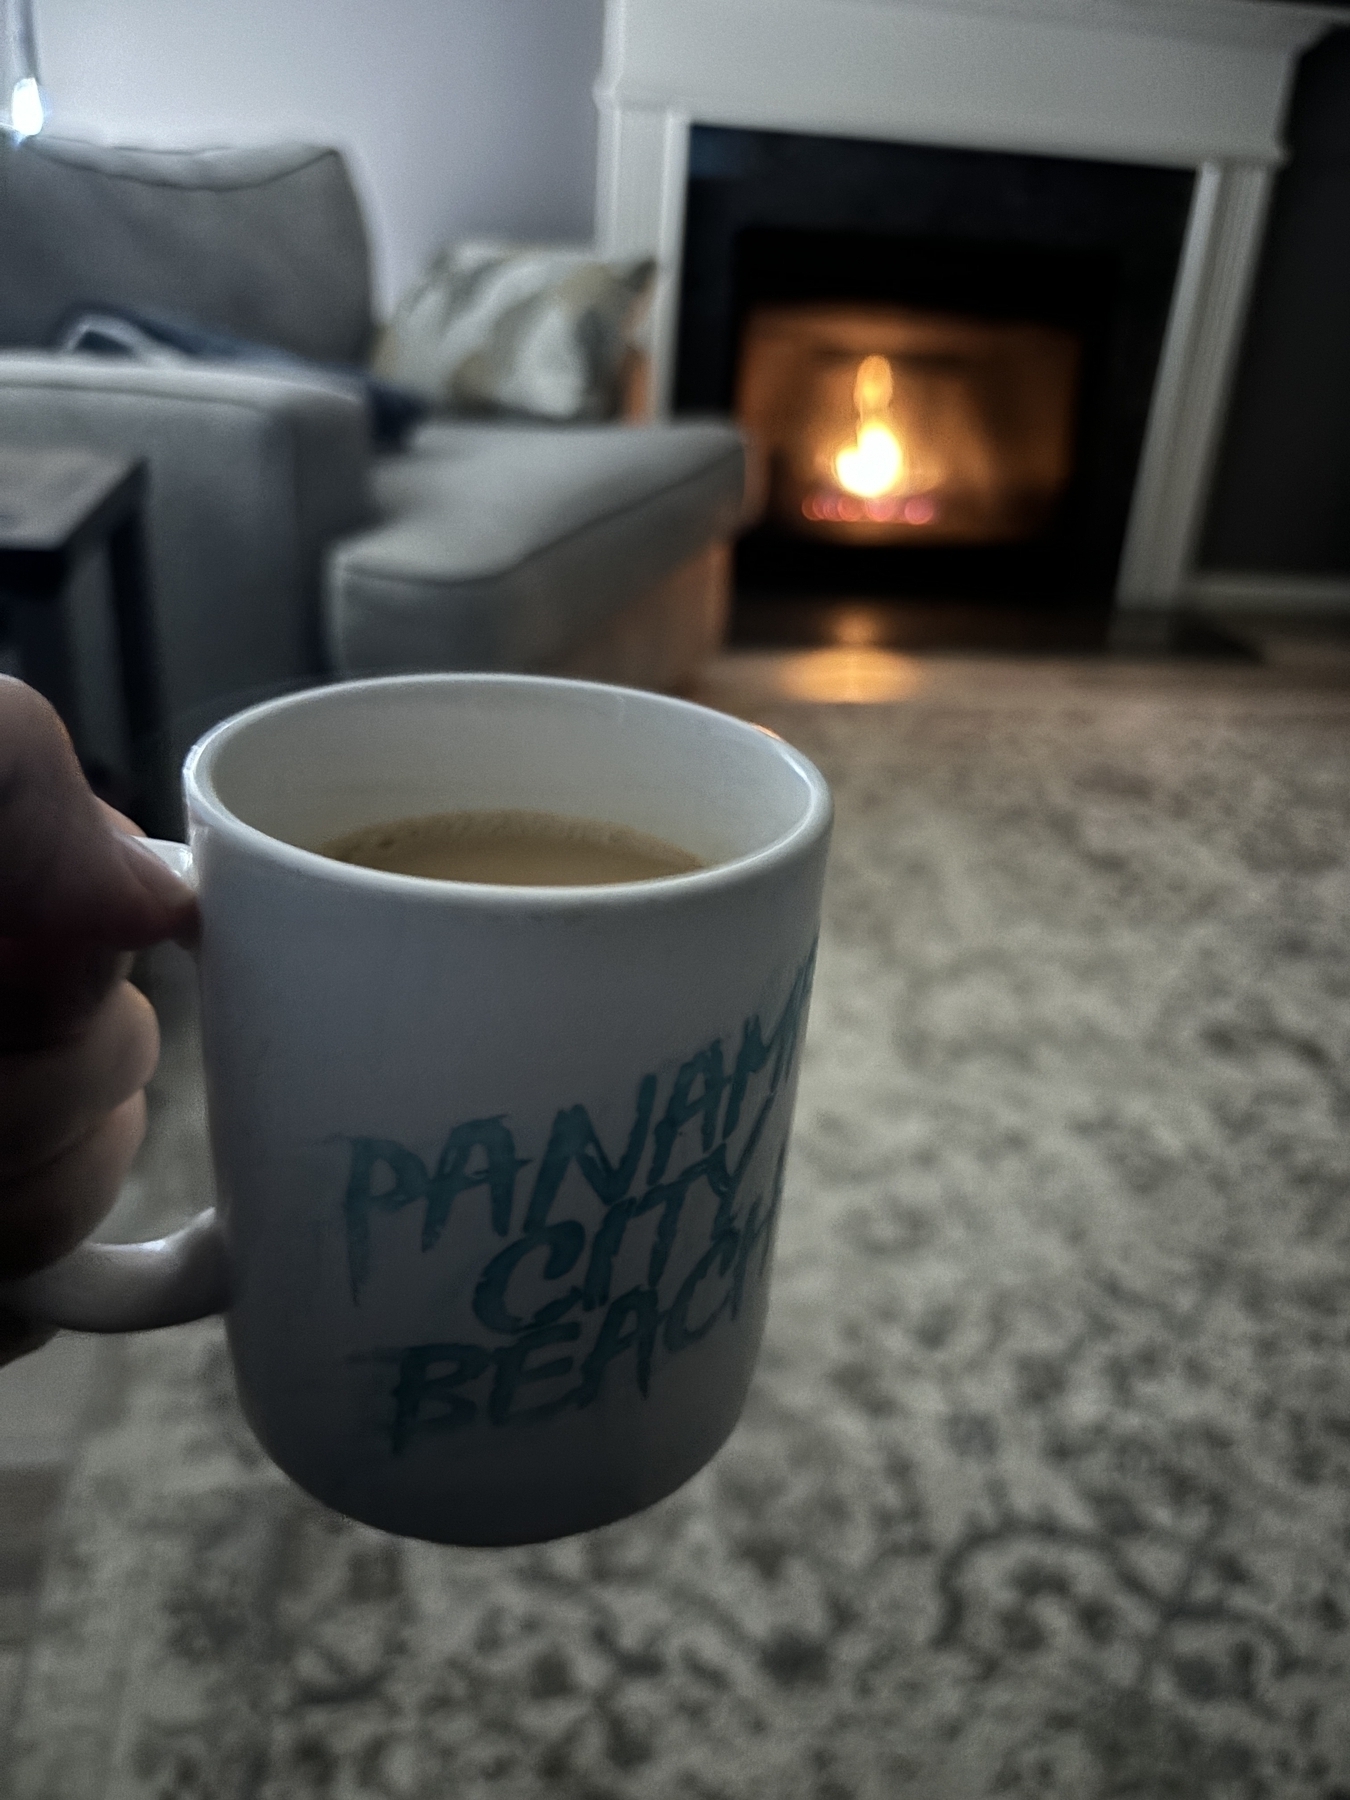 A white mug that reads, “Panama city beach” in a cozy living room in front of a fire